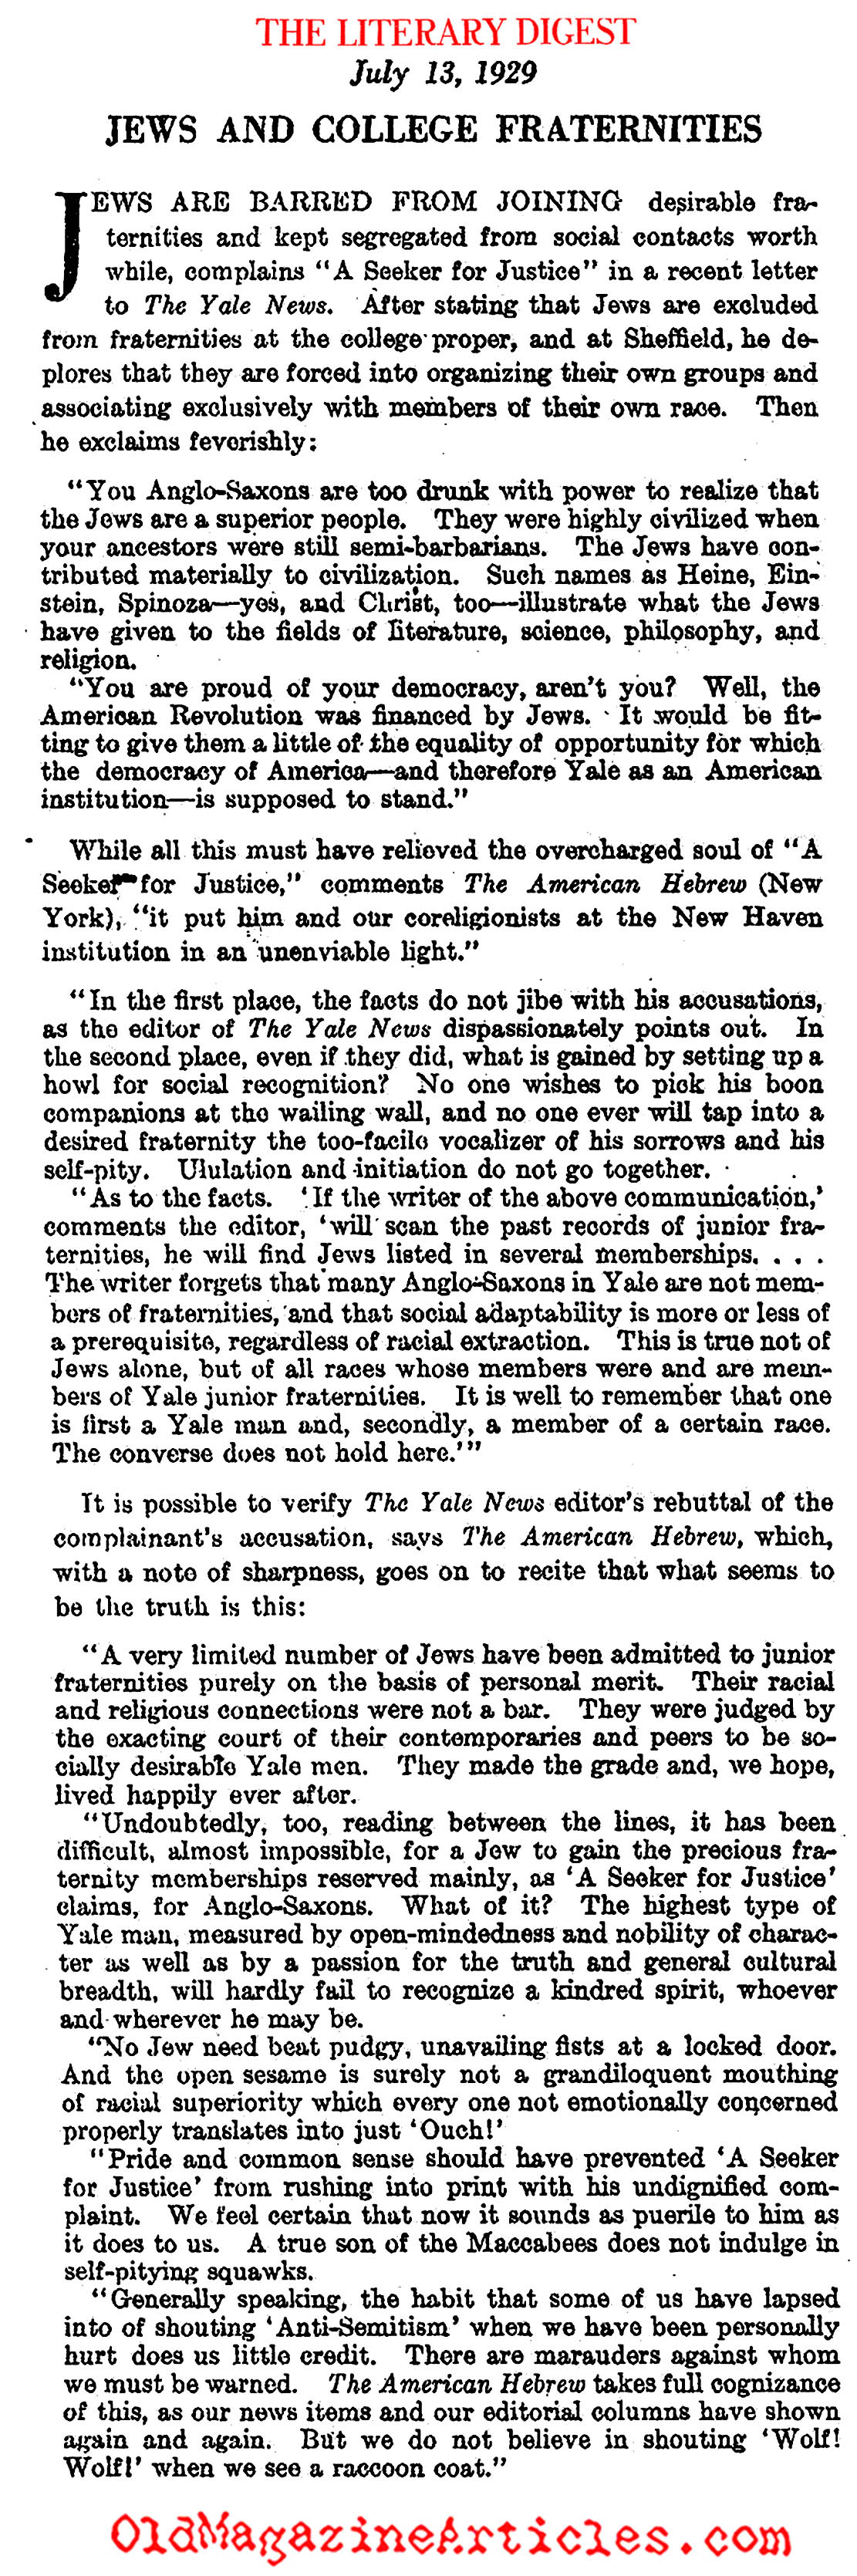 Jews Barred from Fraternities at Yale (Literary Digest, 1929)